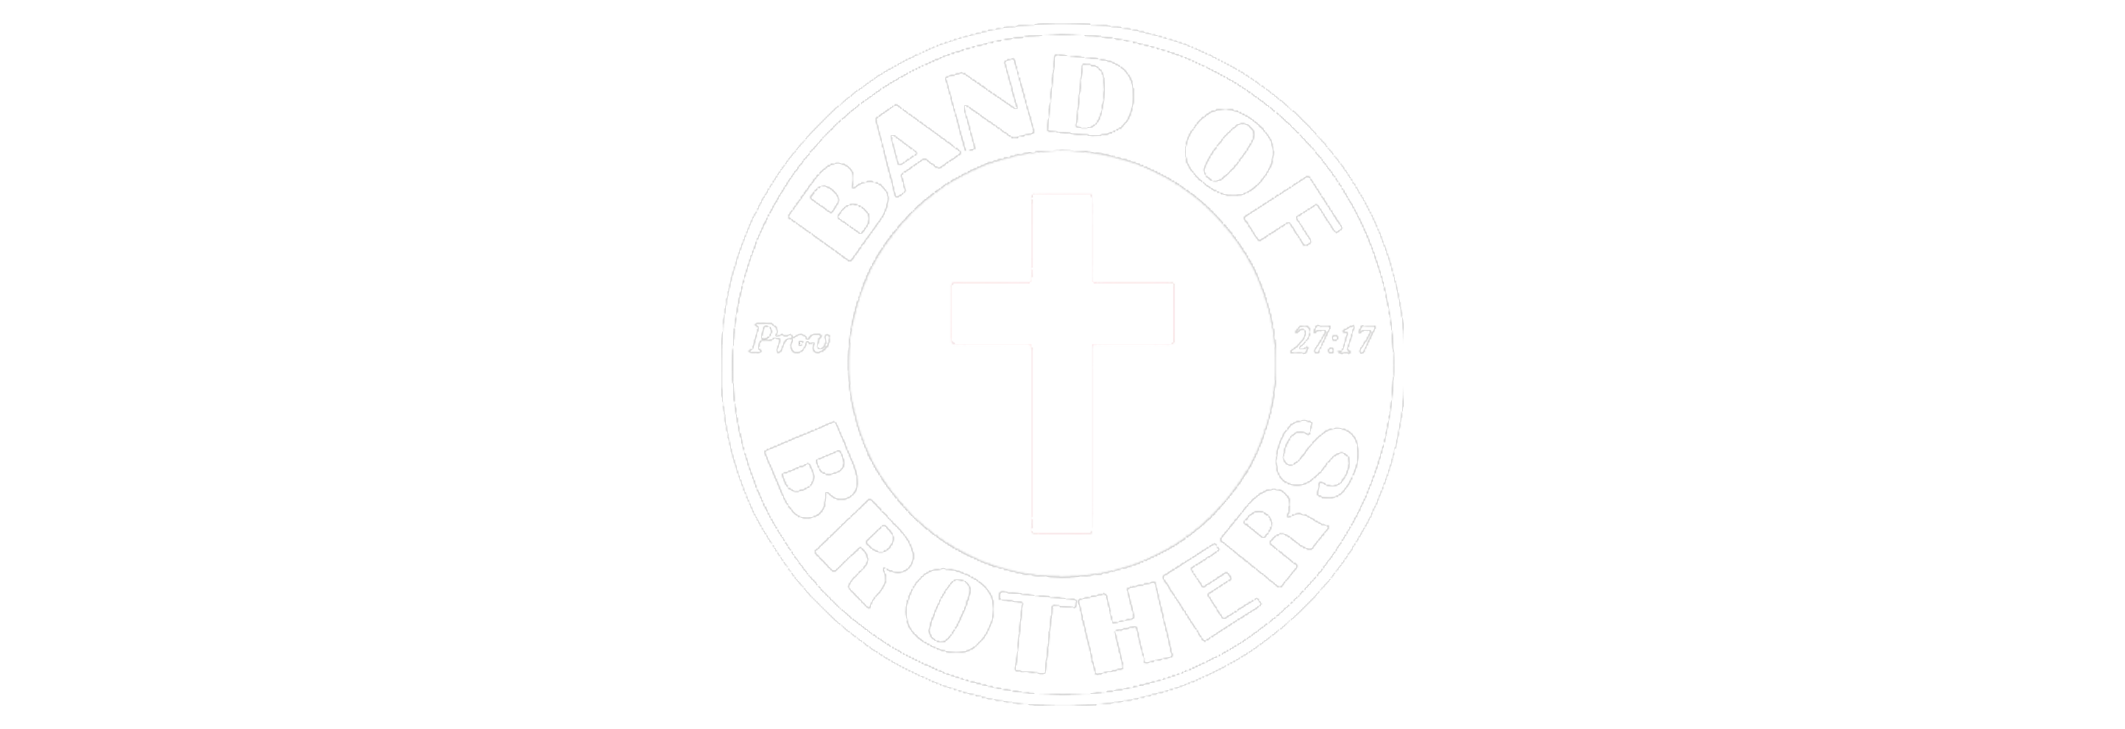 Band of Brothers Ministries